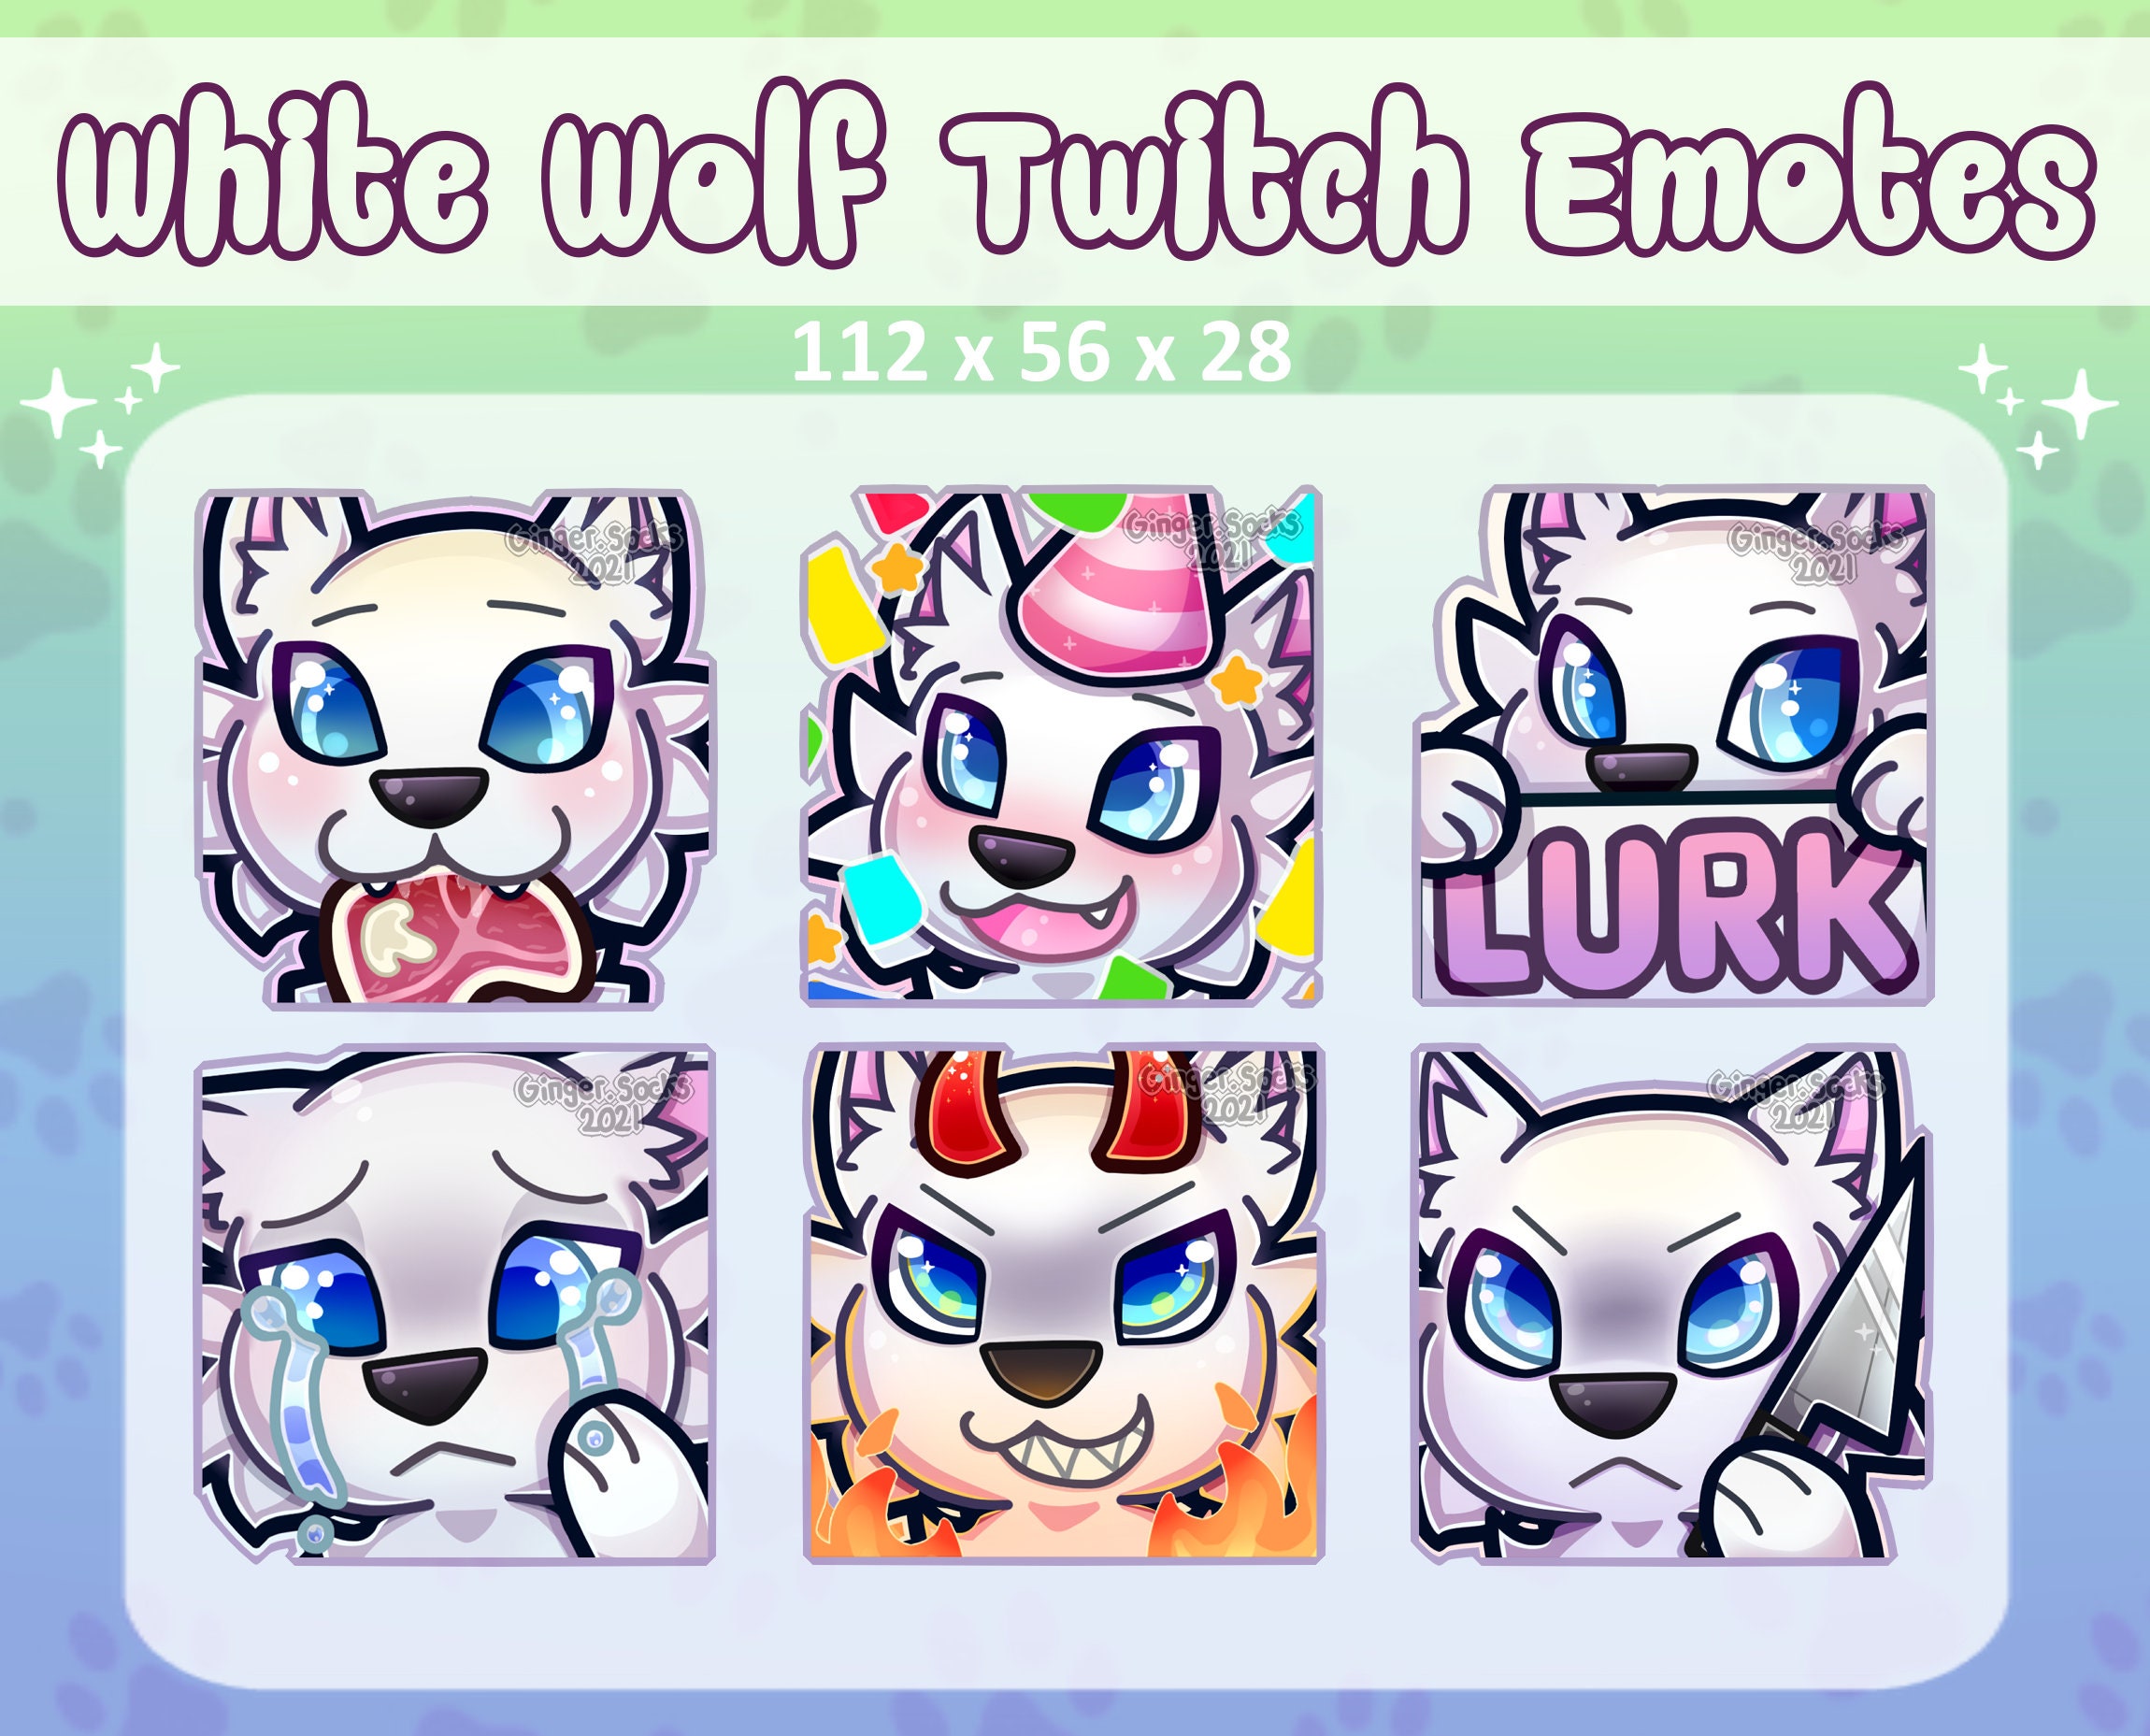 Emotes Pack for Twitch White Wolf Cute Premade Emote Set